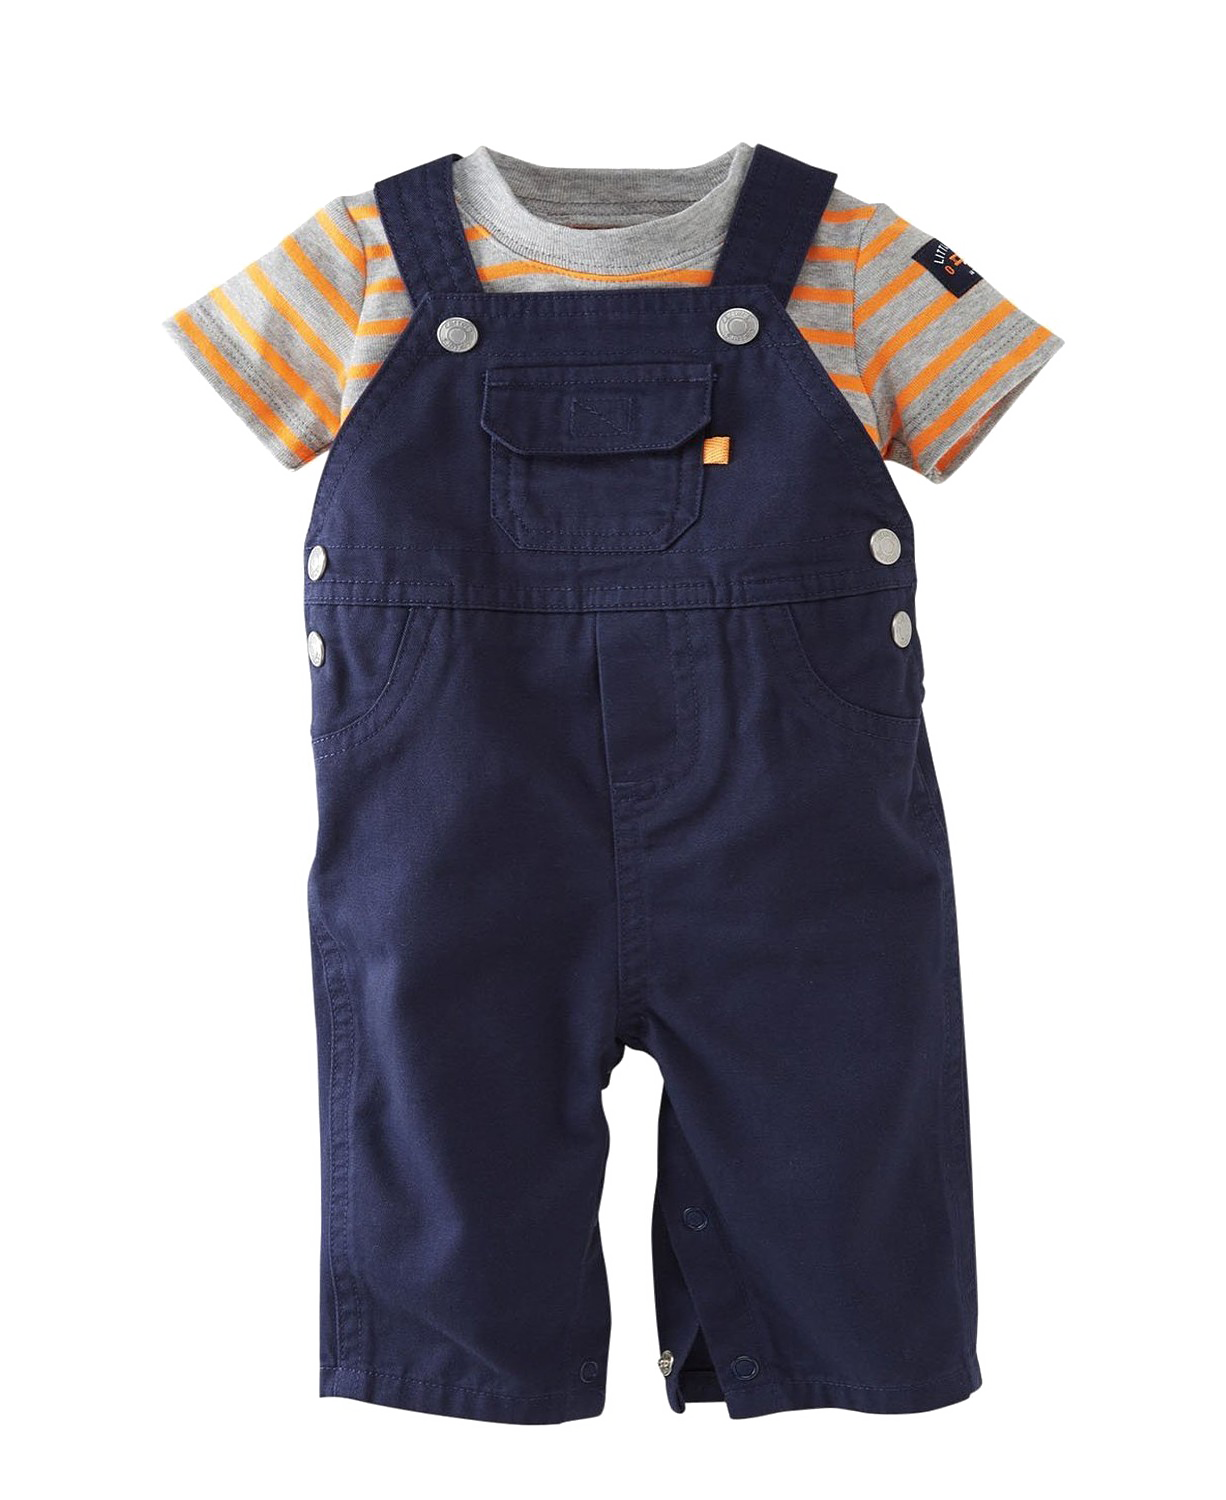 Baby Clothes Free Photo PNG PNG Image